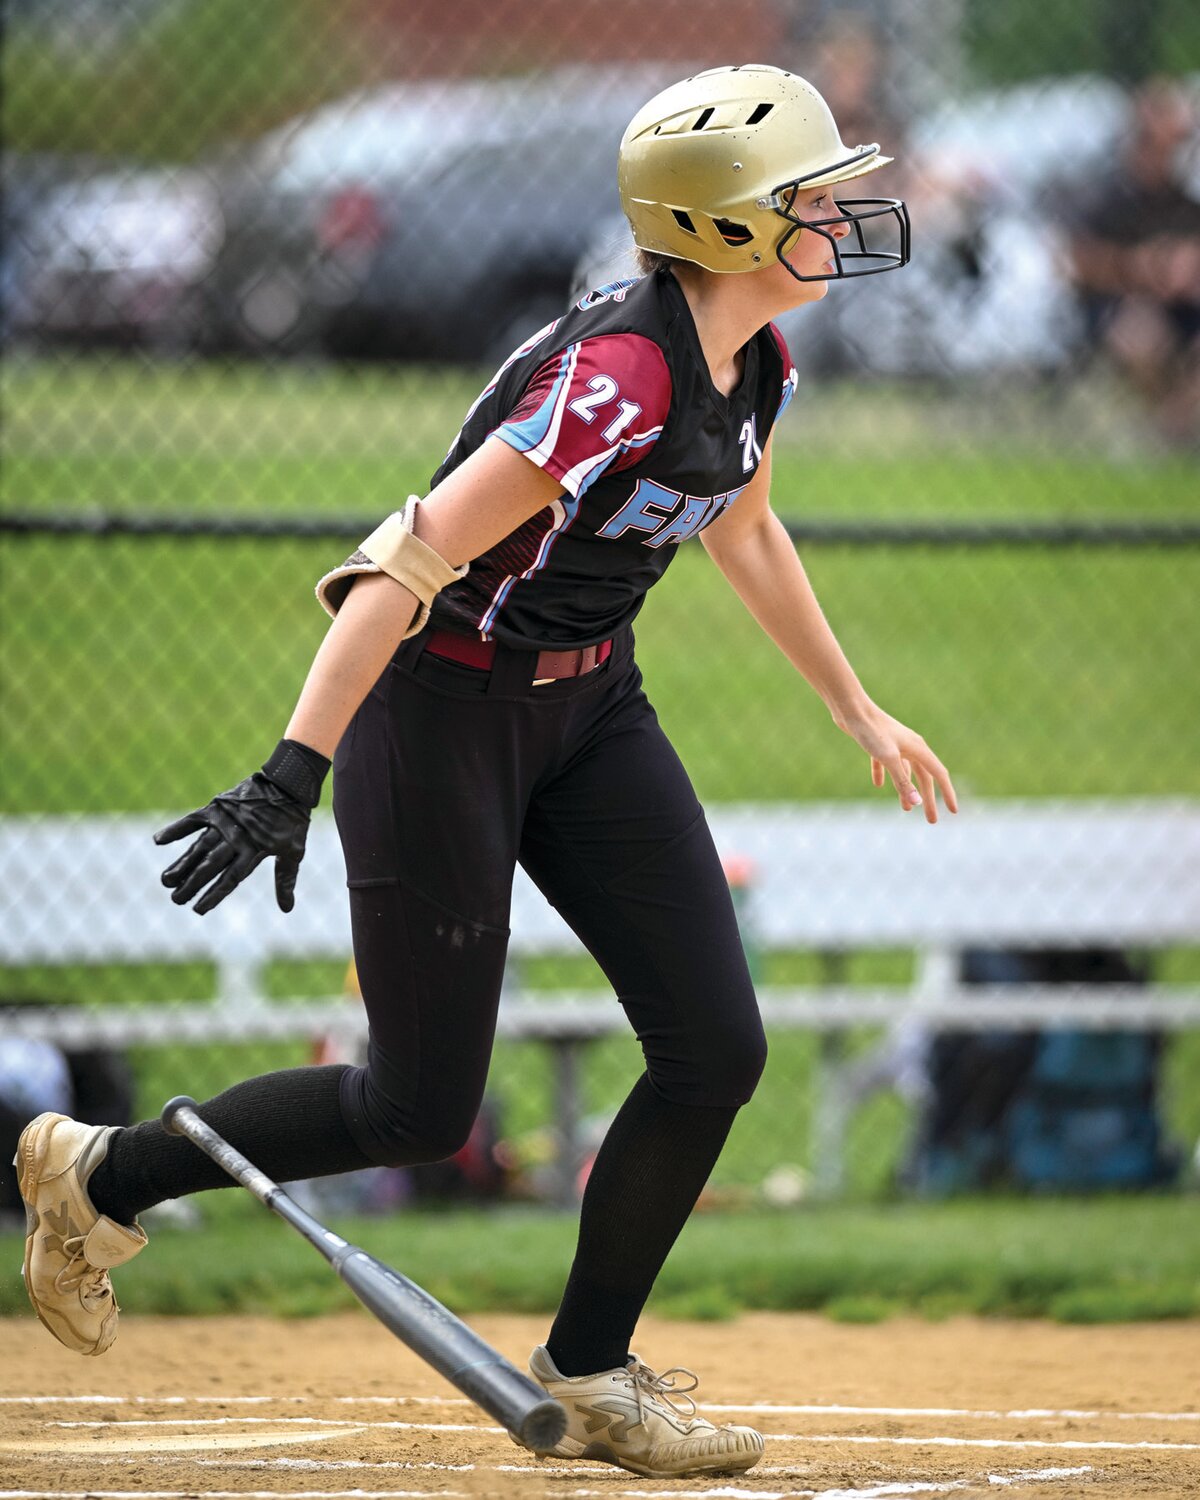 Faith Christian’s Kam Pepkowki watches her first-inning base hit, which put Faith Christian up 1-0.